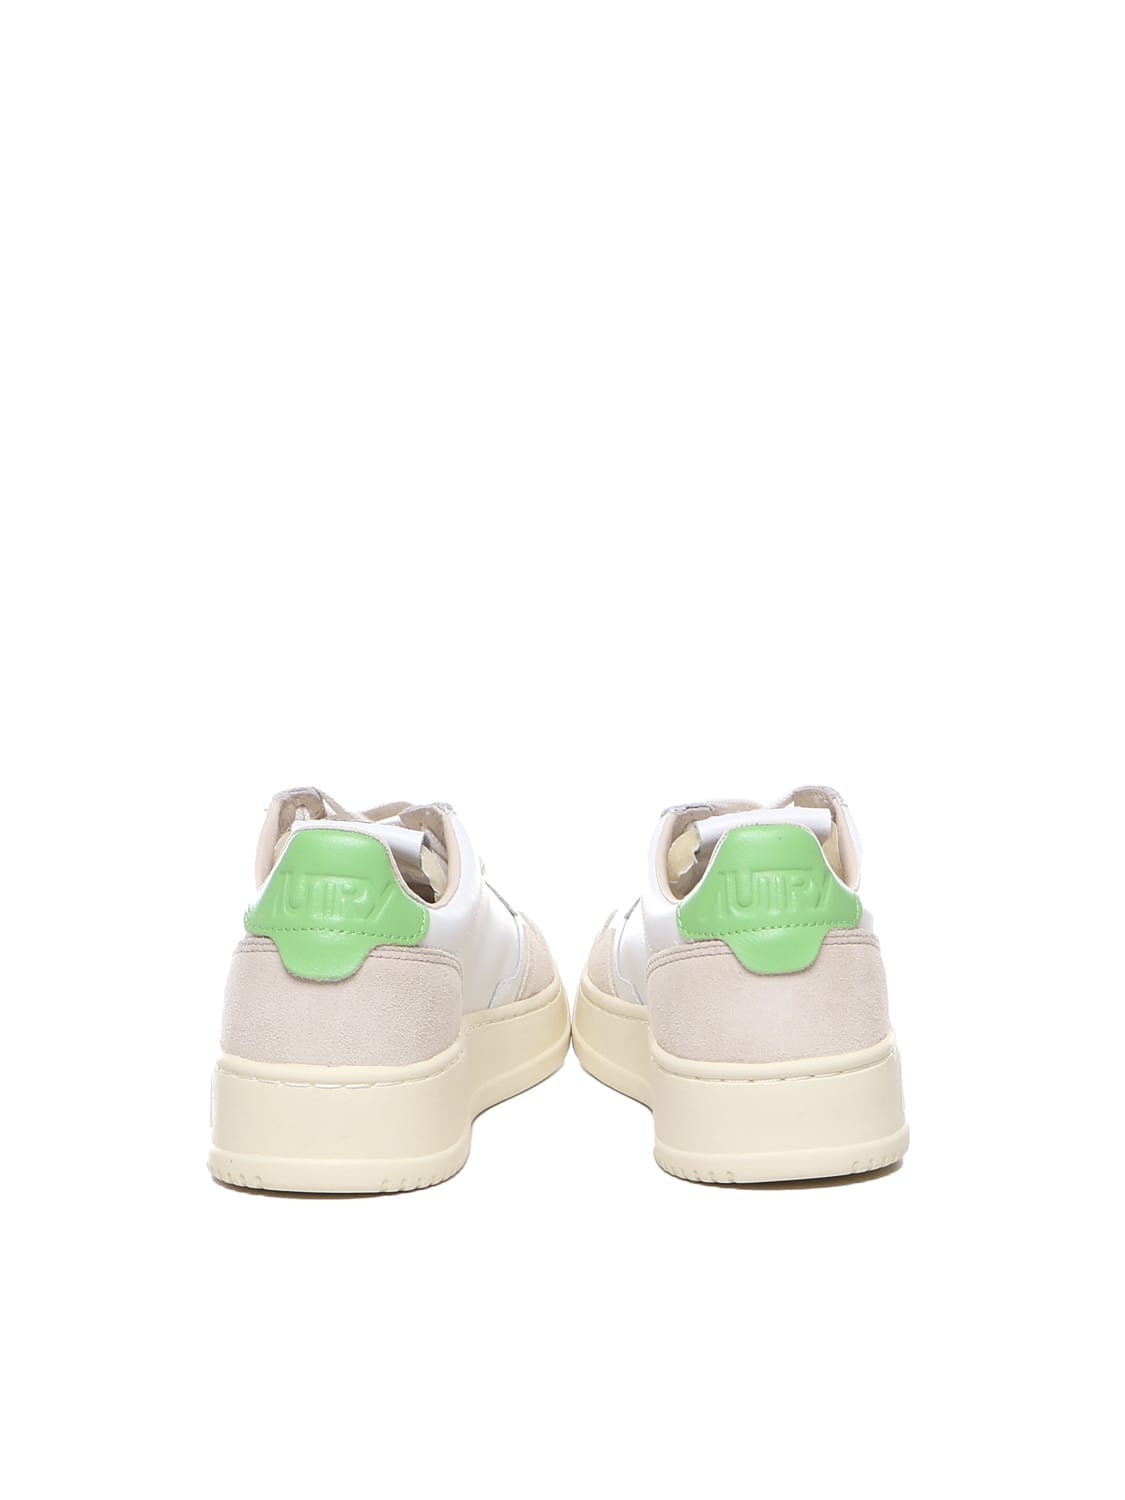 Shop Autry Sneakers Medalist Basse In Pelle E Camoscio In White, Green